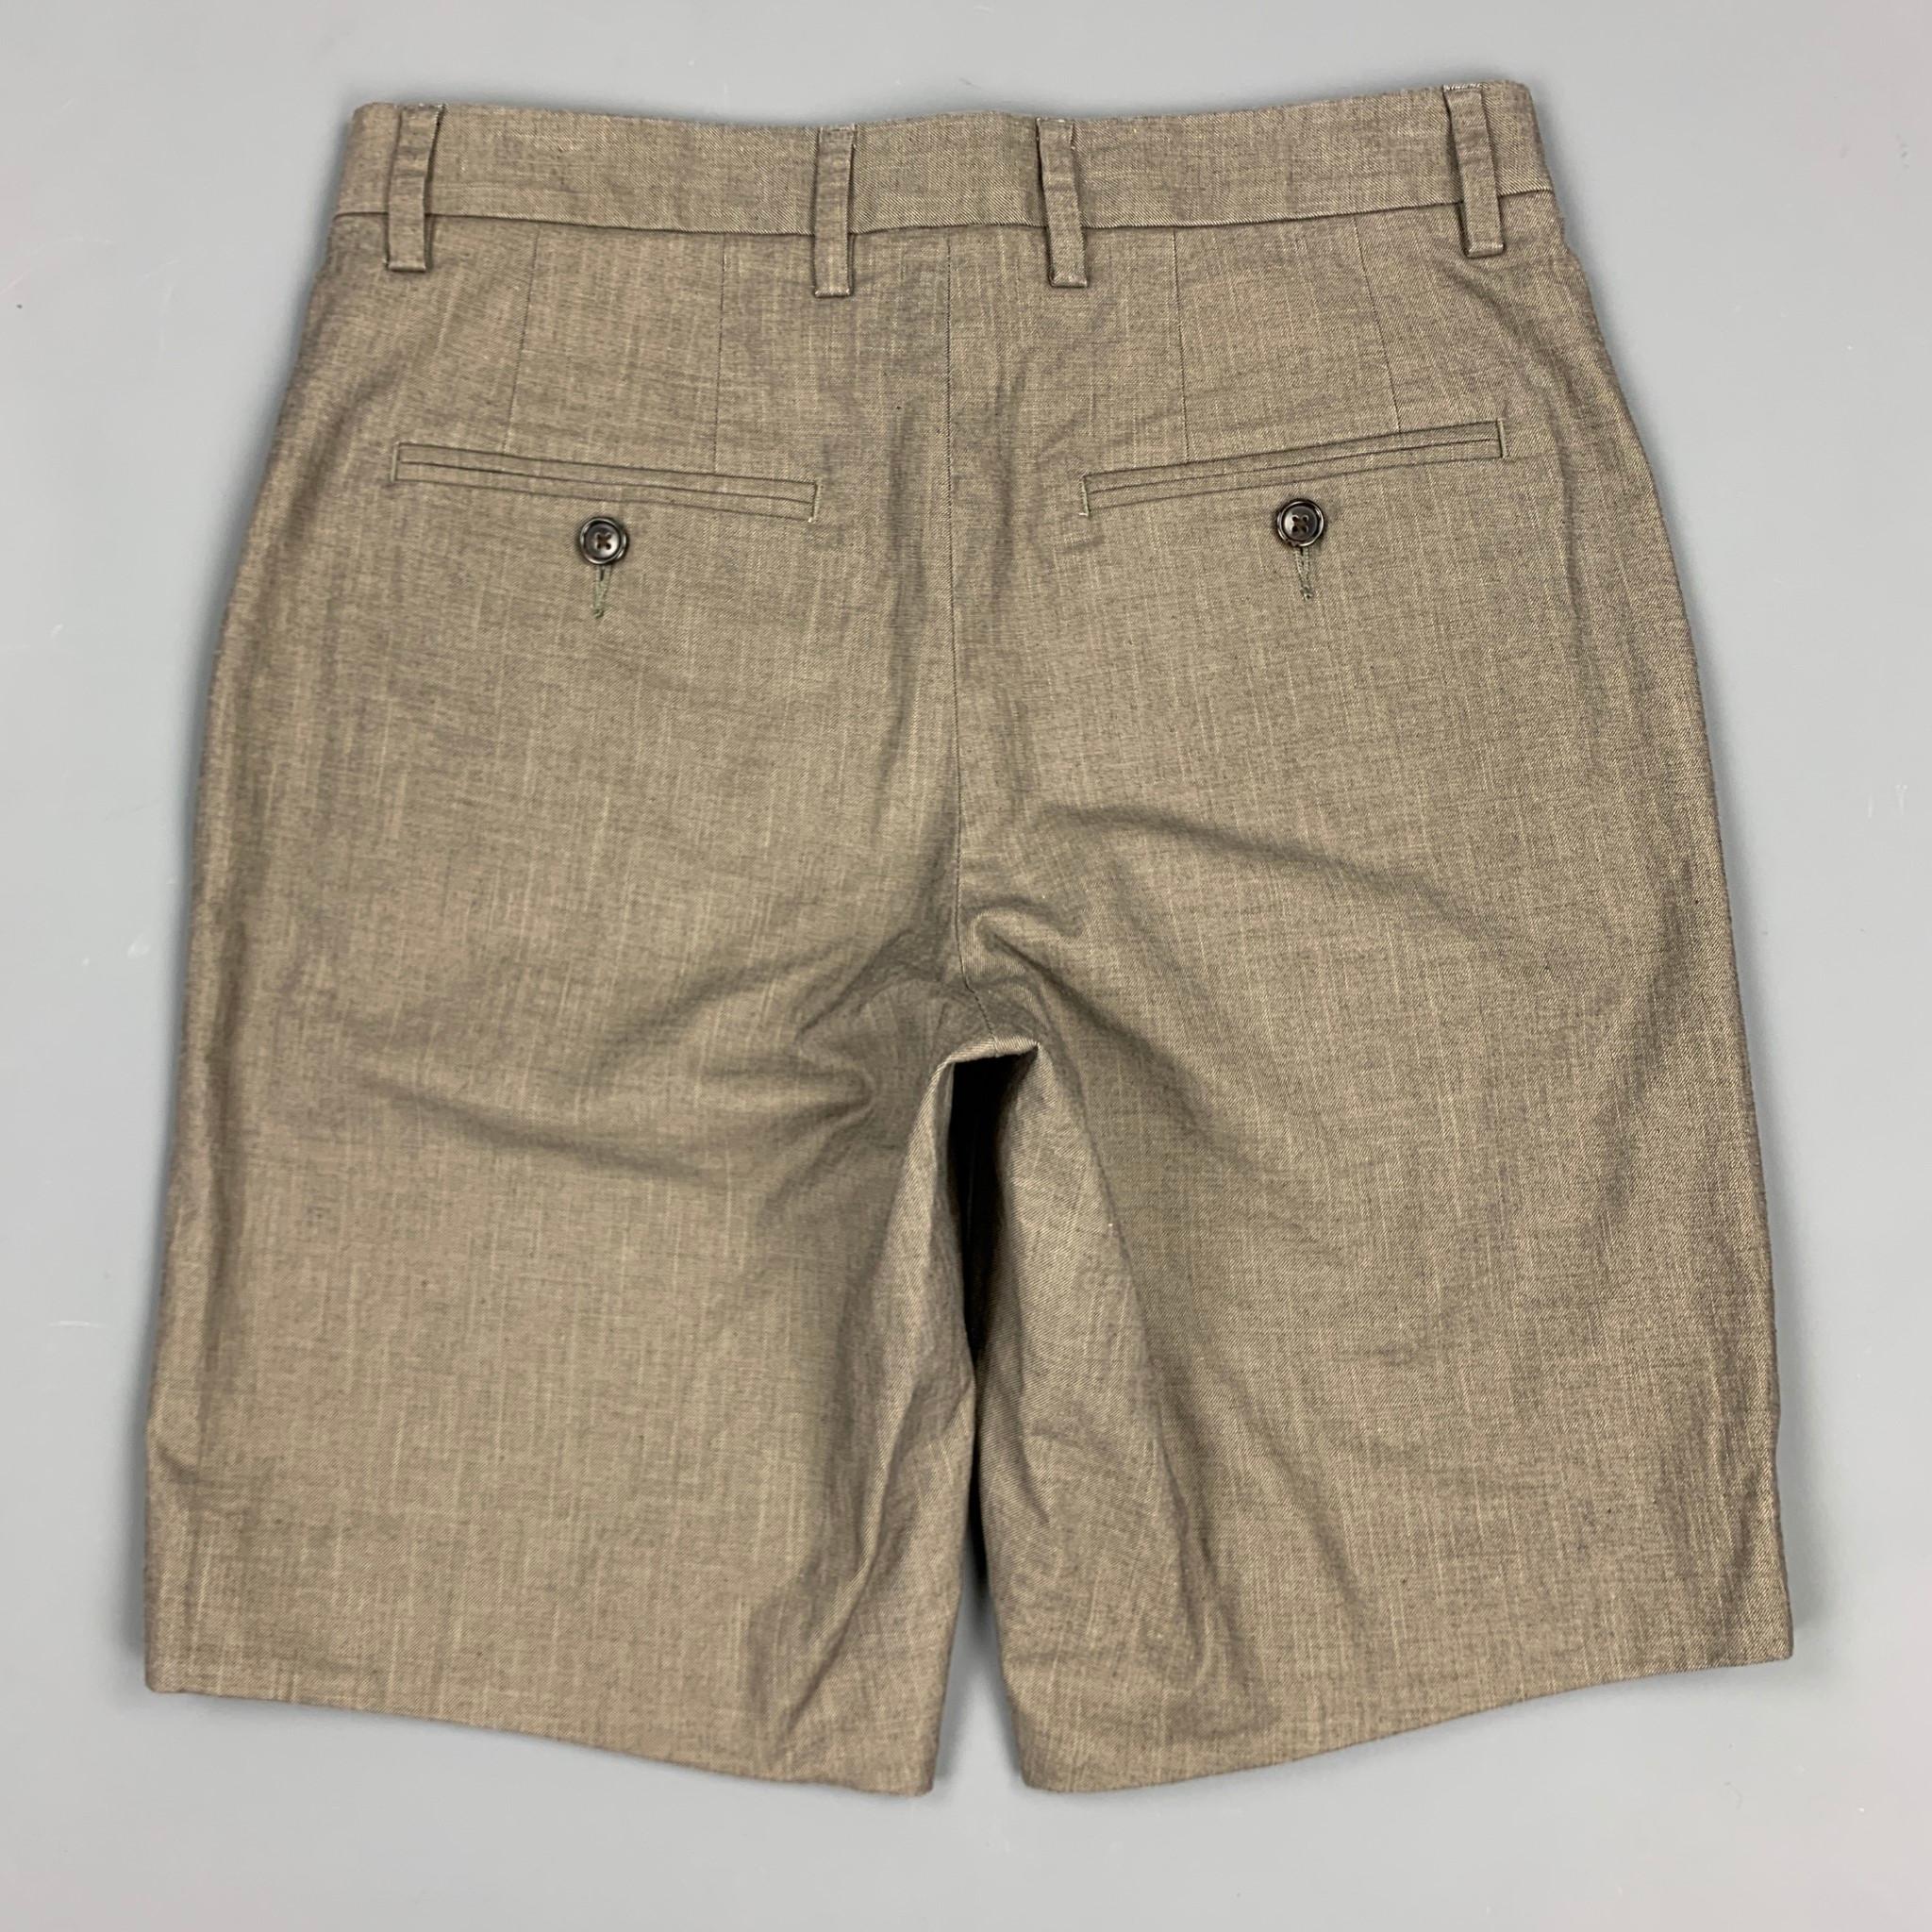 VINCE shorts comes in a slate cotton featuring a zip fly closure.

New With Tags.
Marked: 28

Measurements:

Waist: 30 in. 
Rise: 10 in. 
Inseam: 8.5 in. 